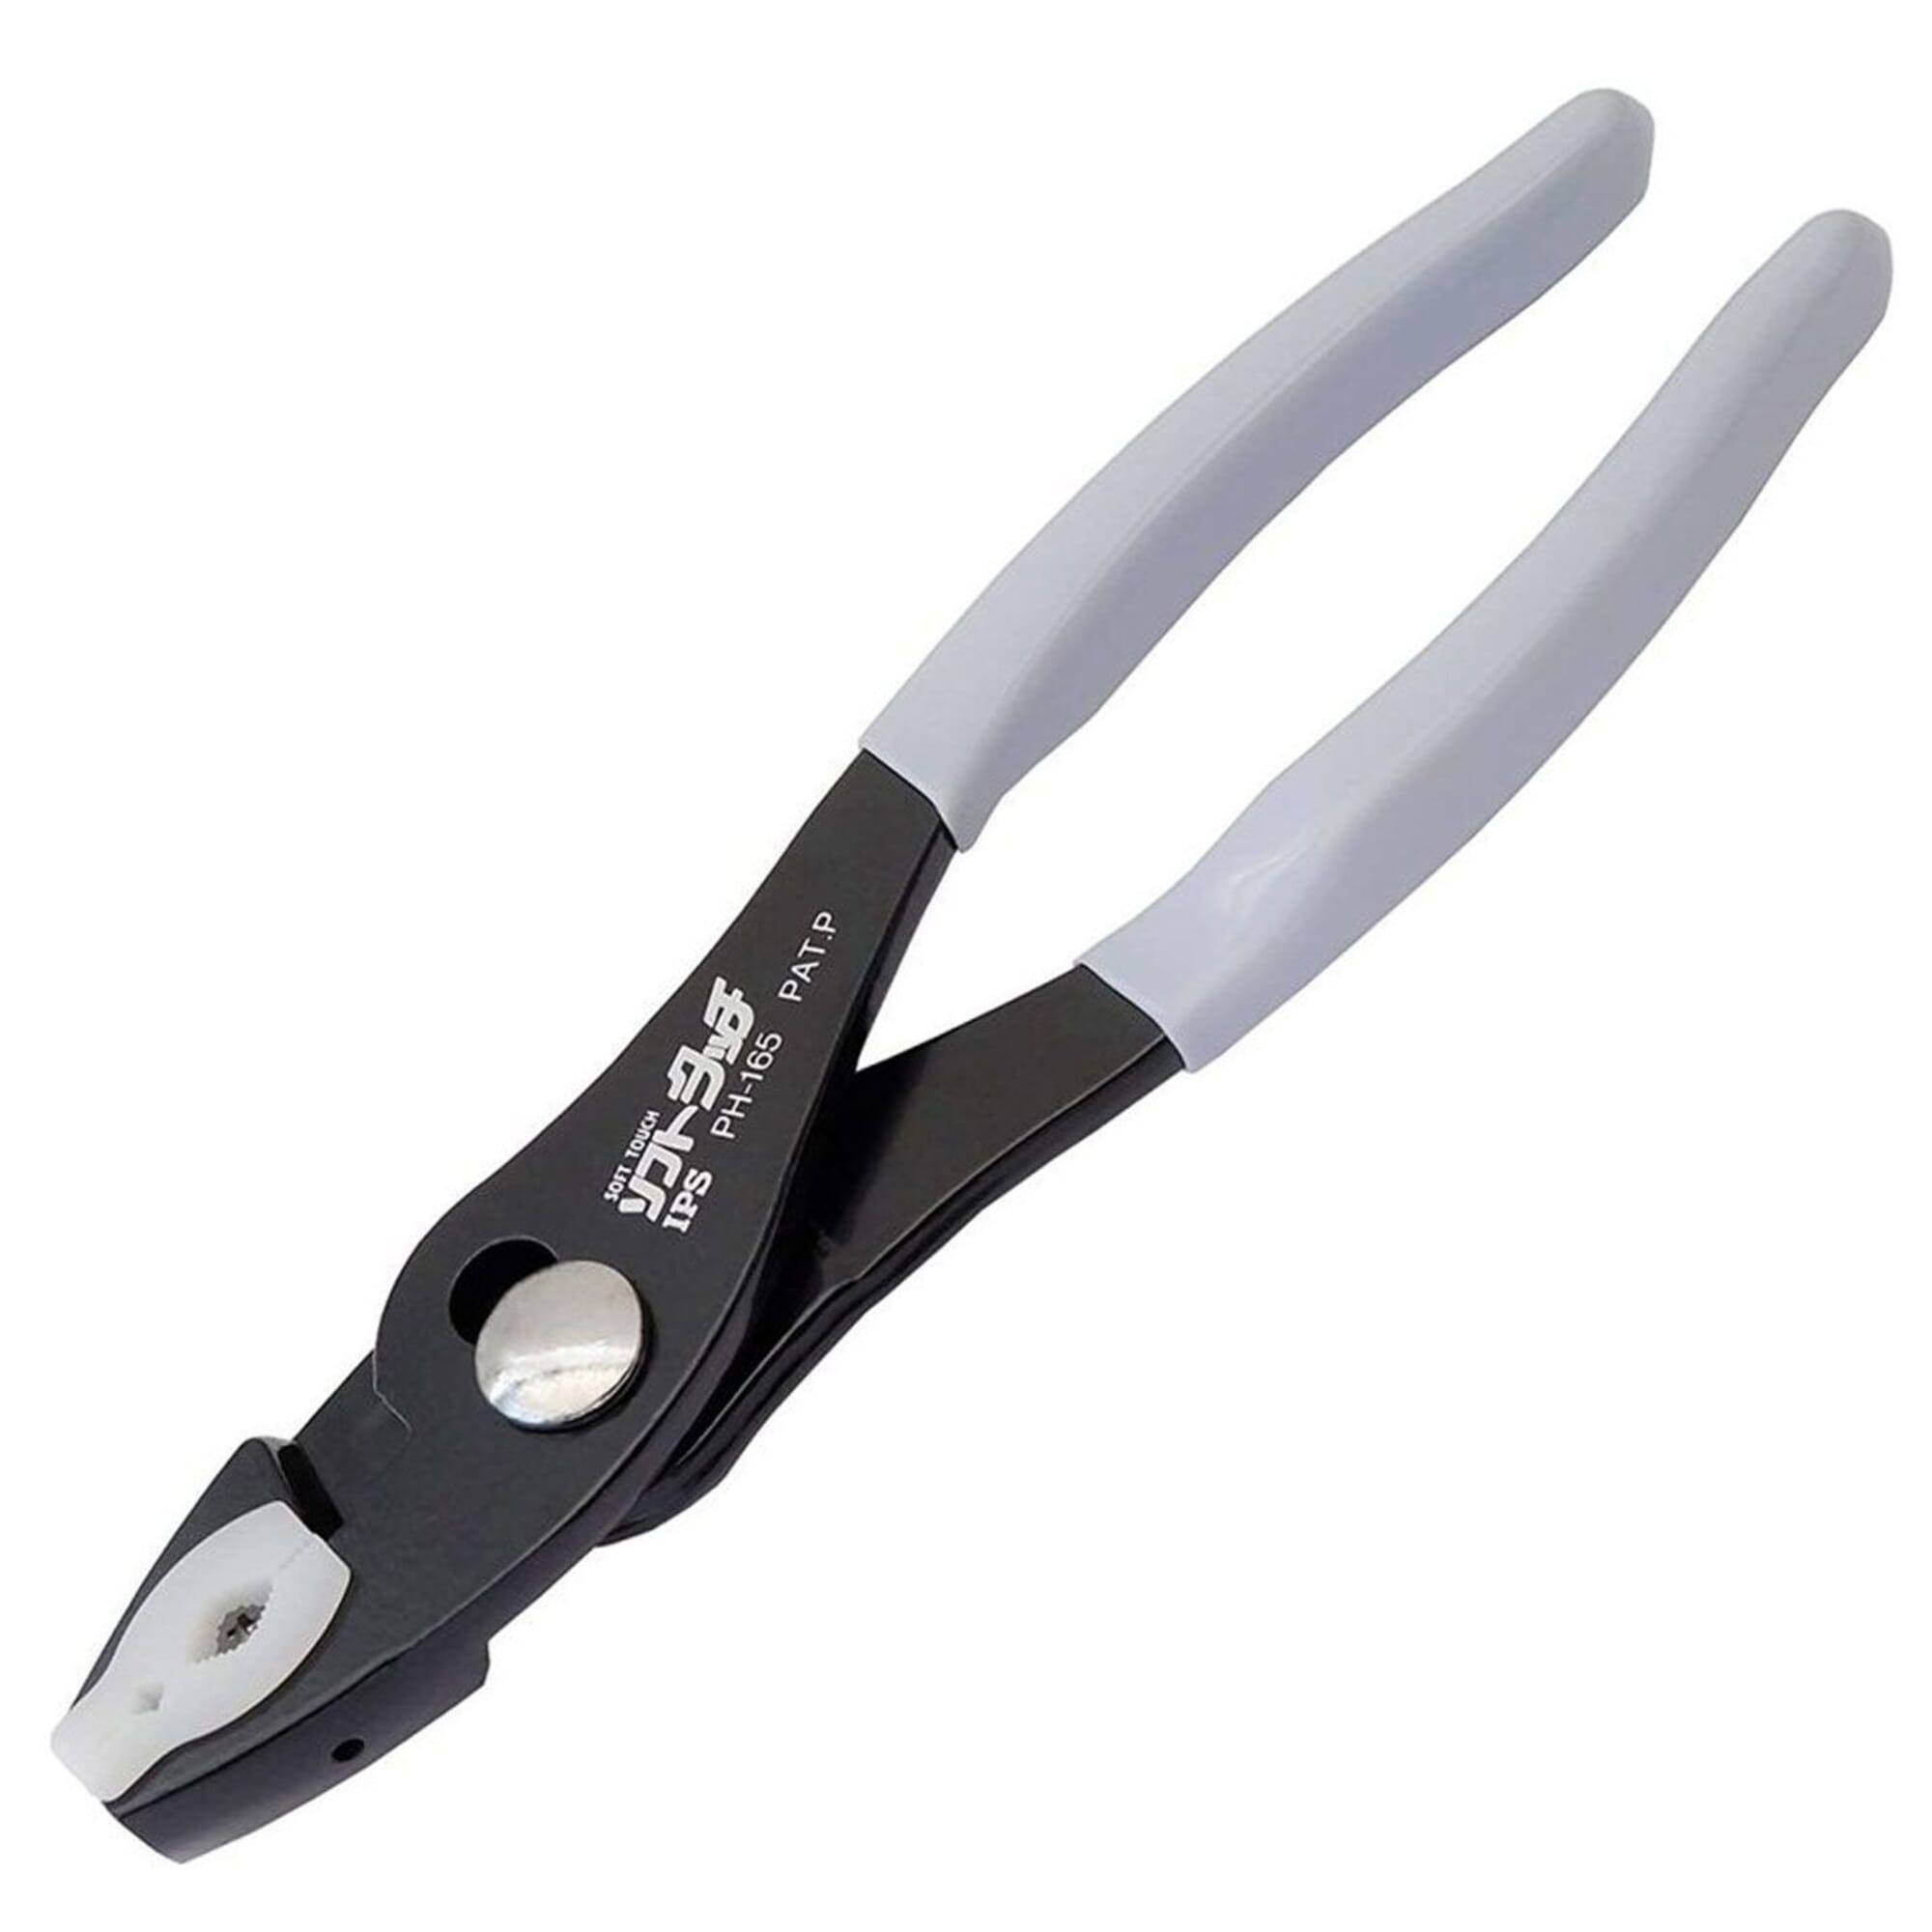 Soft Jaw Pliers - Model Number: 45Z